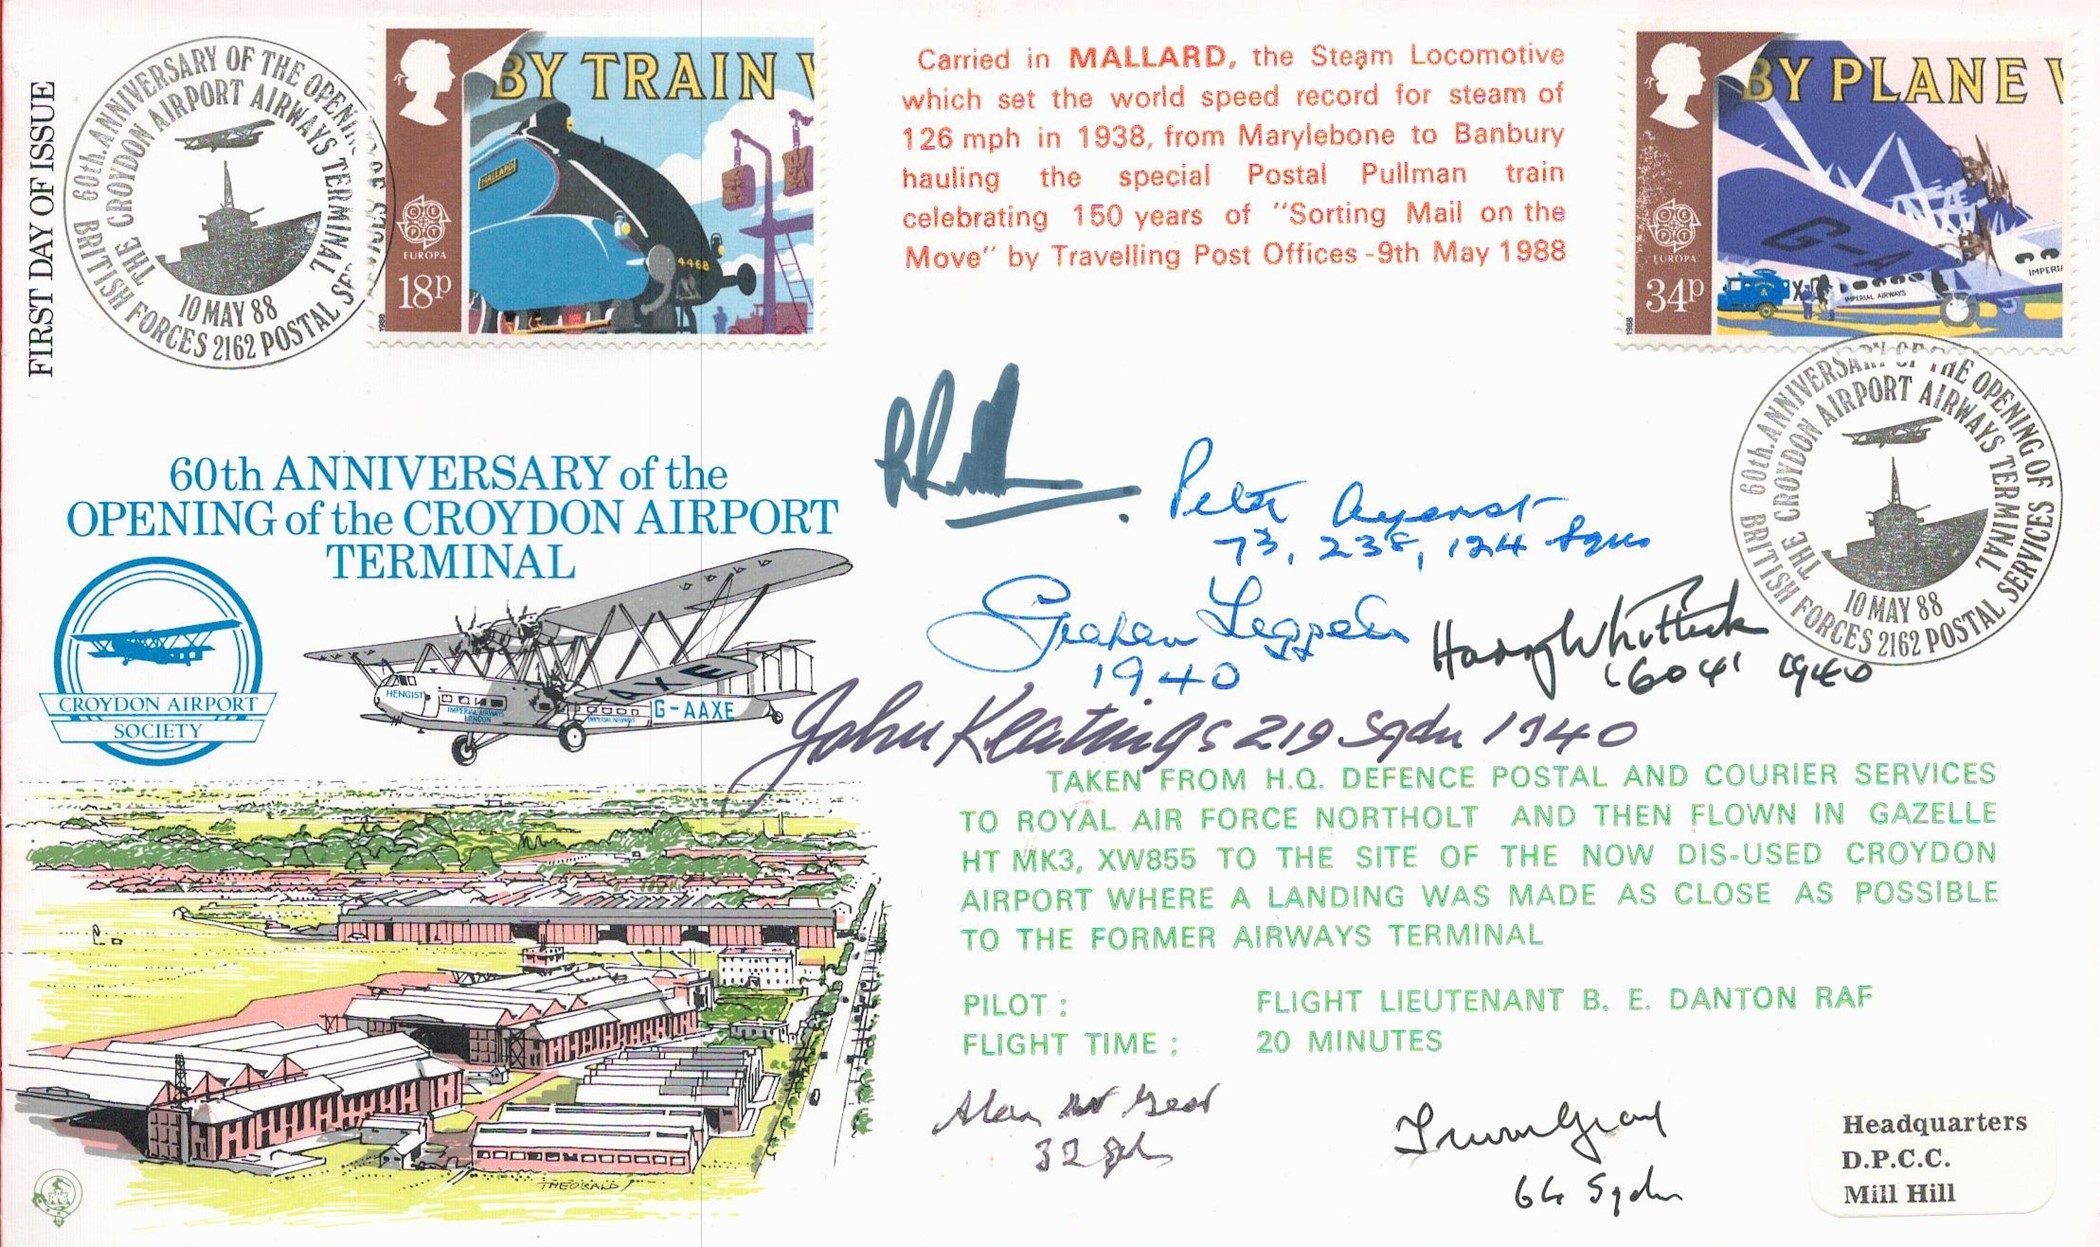 10 May 88 BFPS 2162 60th Anniversary of the Opening of the Croydon Airport Terminal with 34p